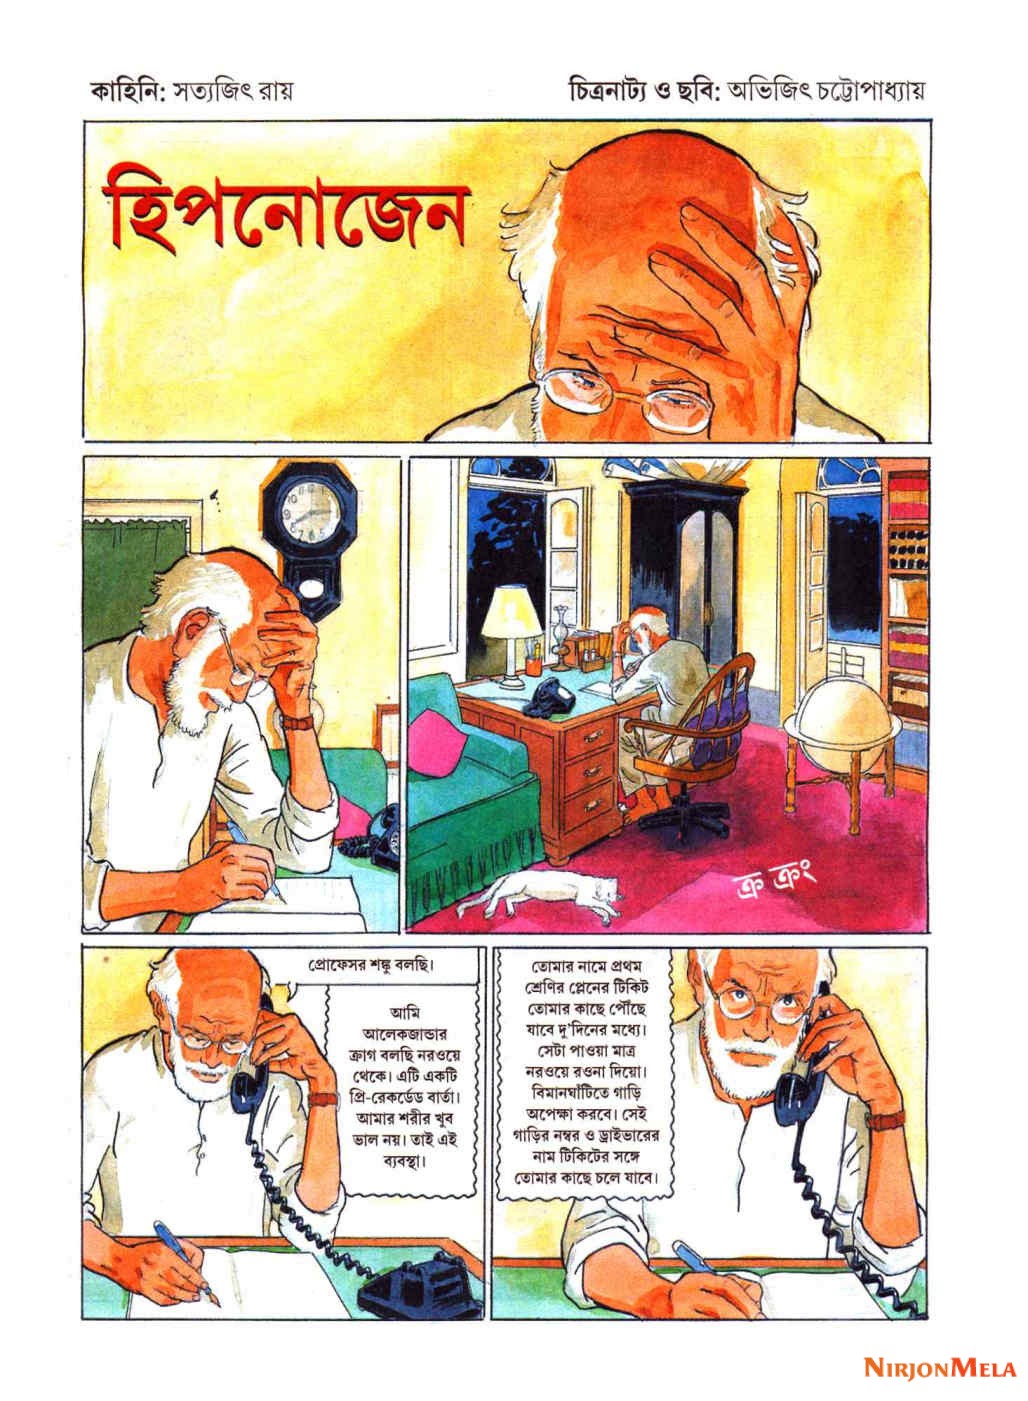 Extracted-pages-from-Anandamela-Special-Edition-on-March-2020_Page1.jpg